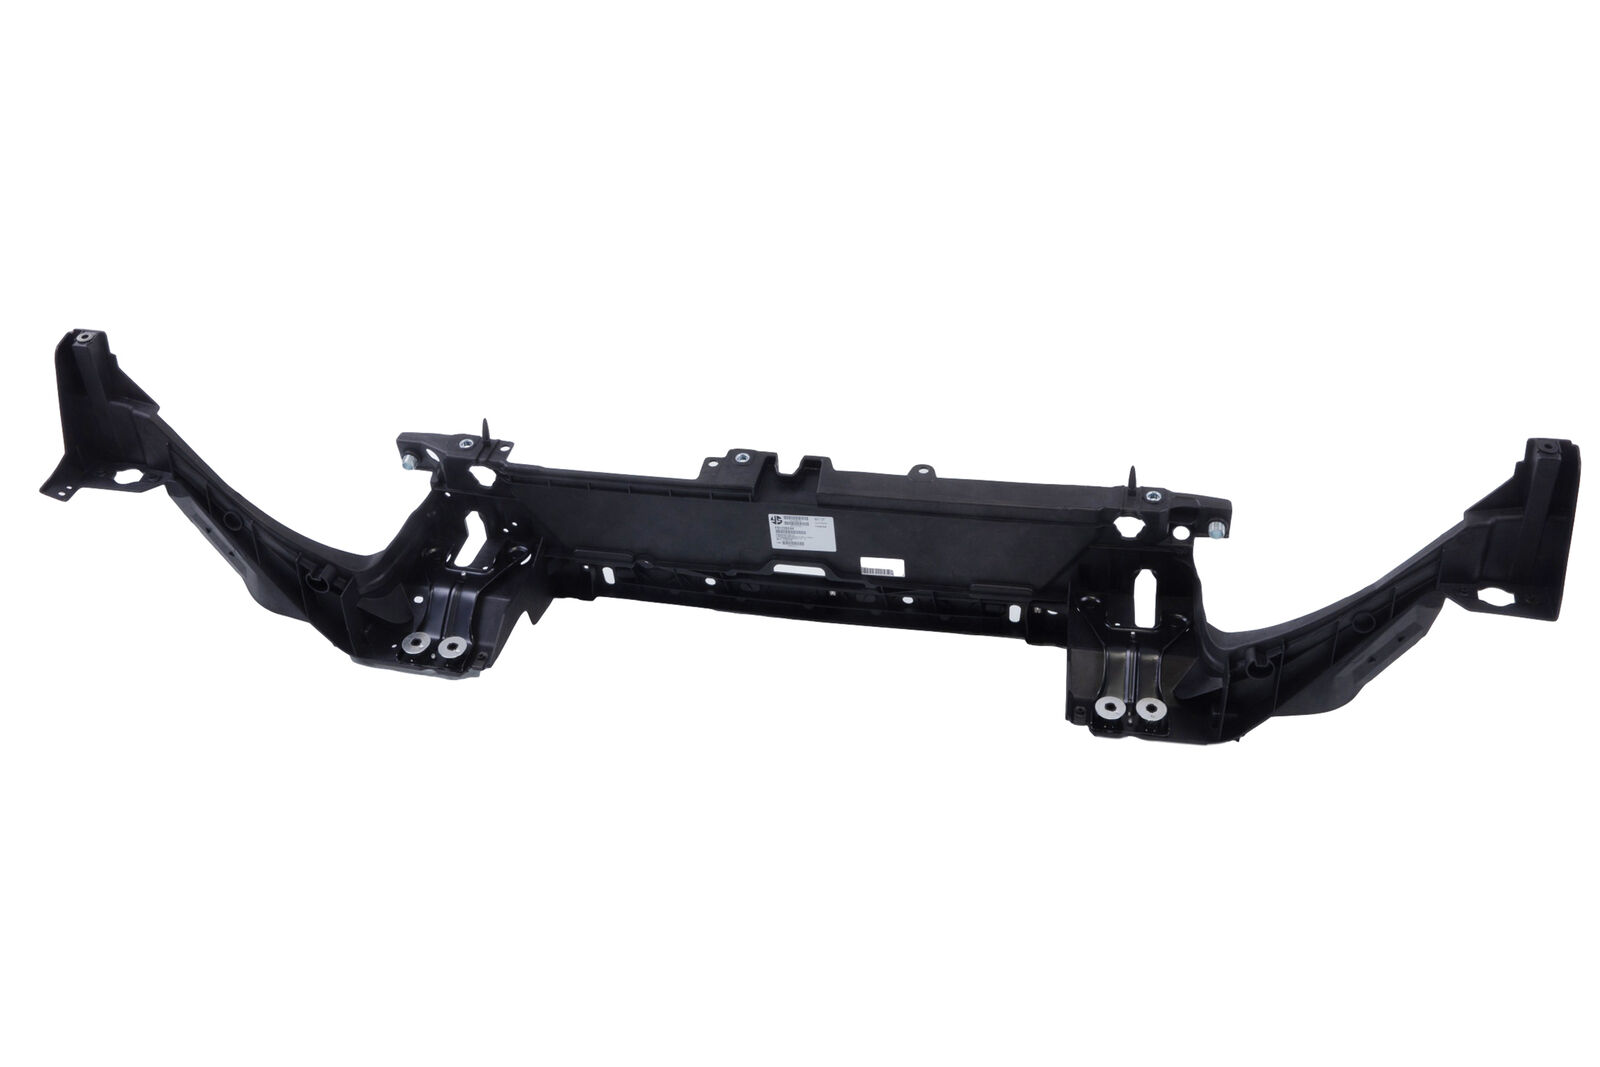 Header Panel Support Replacement For 13-16 Ford Fusion 4 Door Sedan